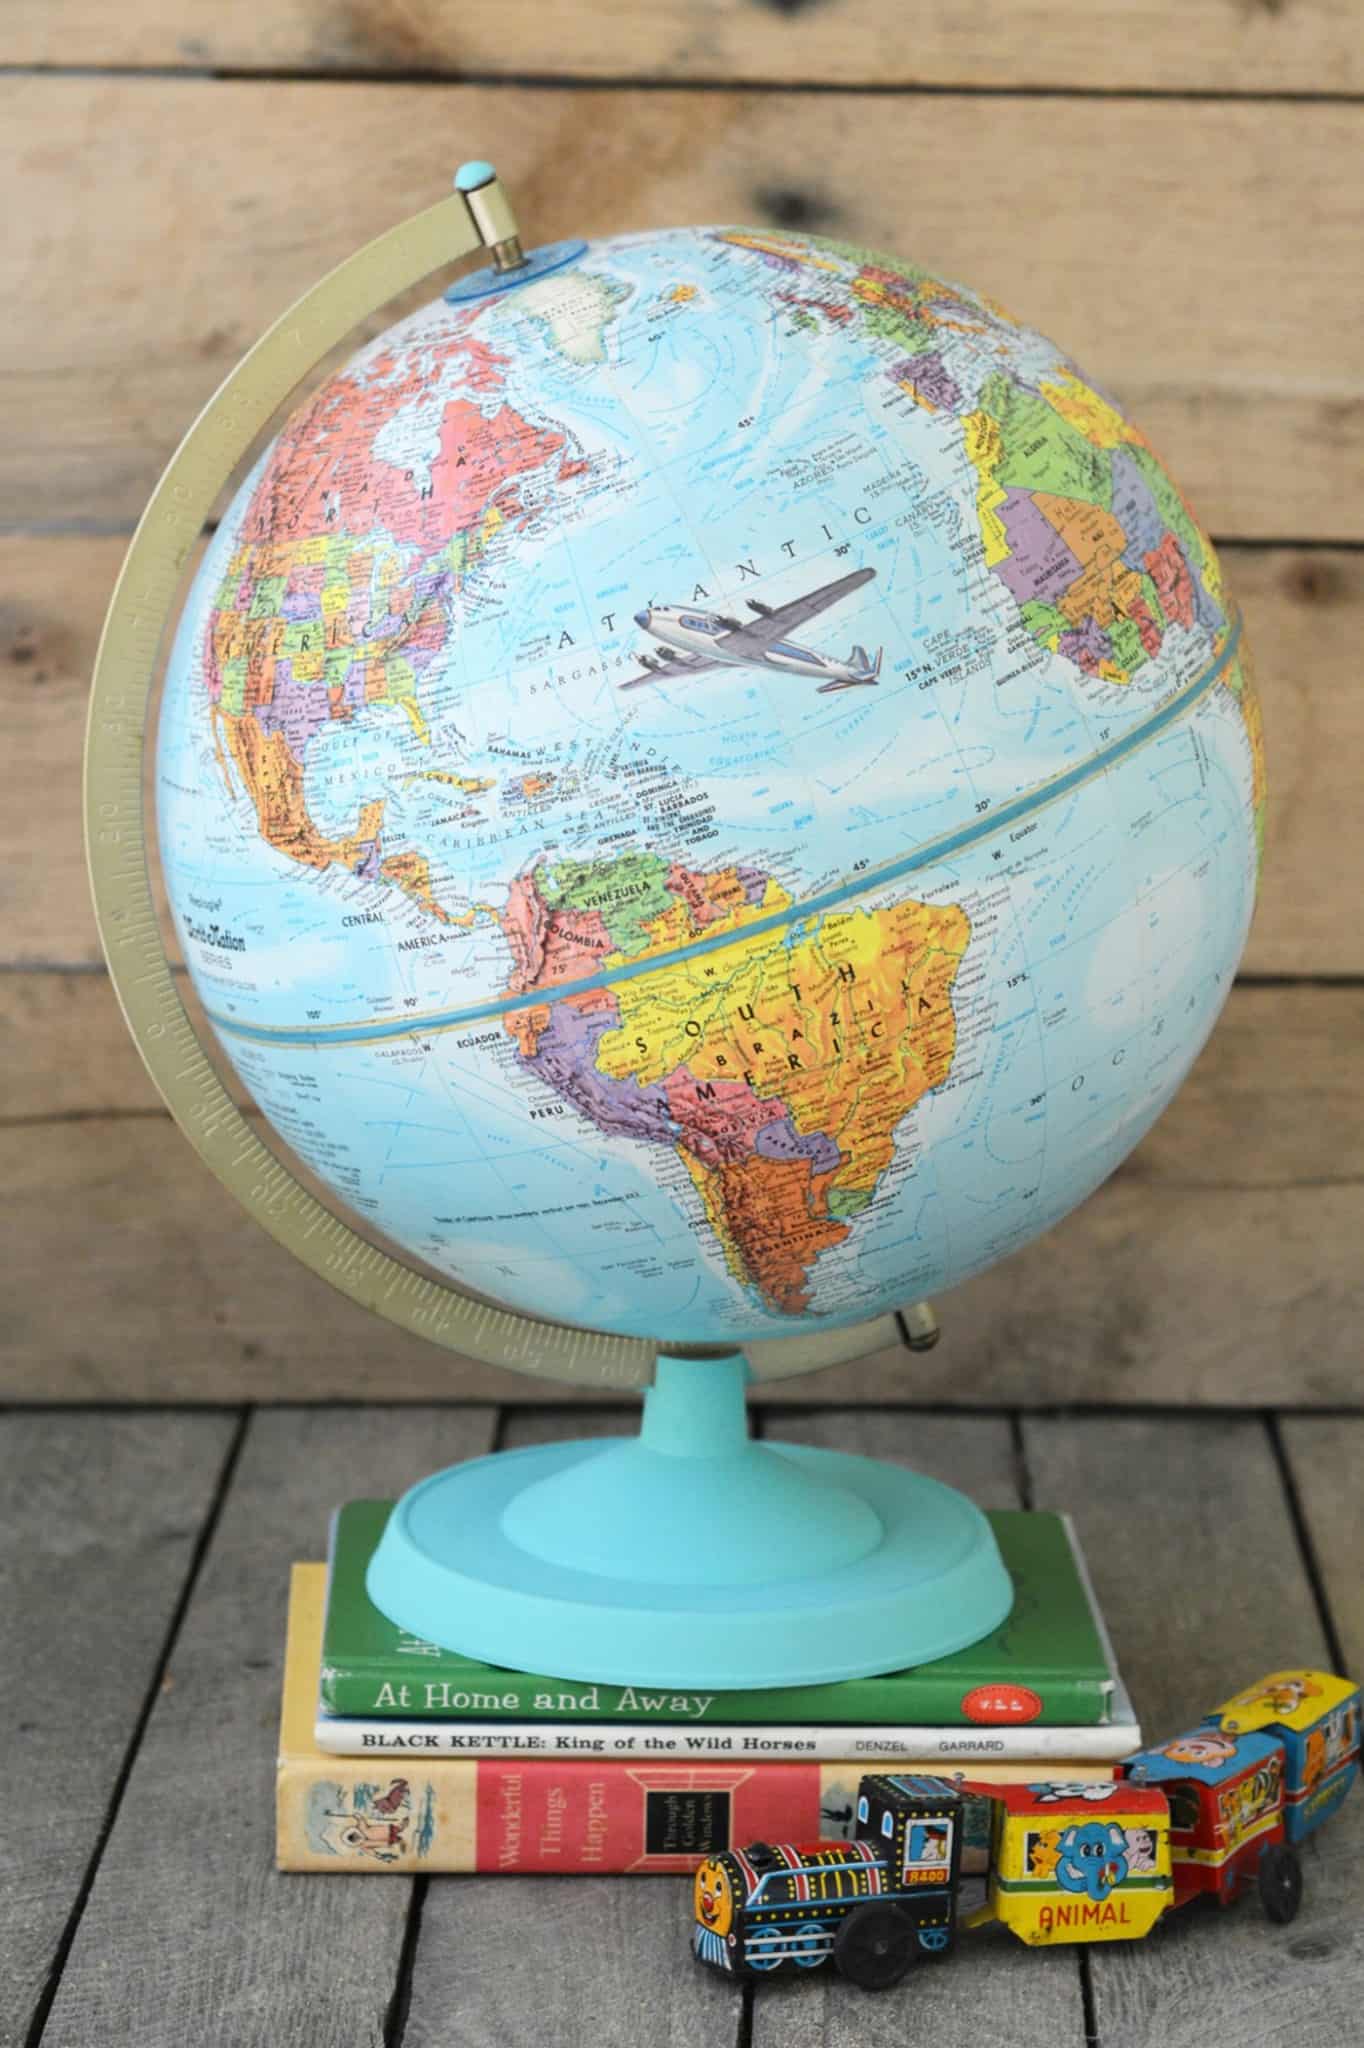 Learn how to customize a vintage globe with your favorite images from children's books - this is such a unique home decor project!